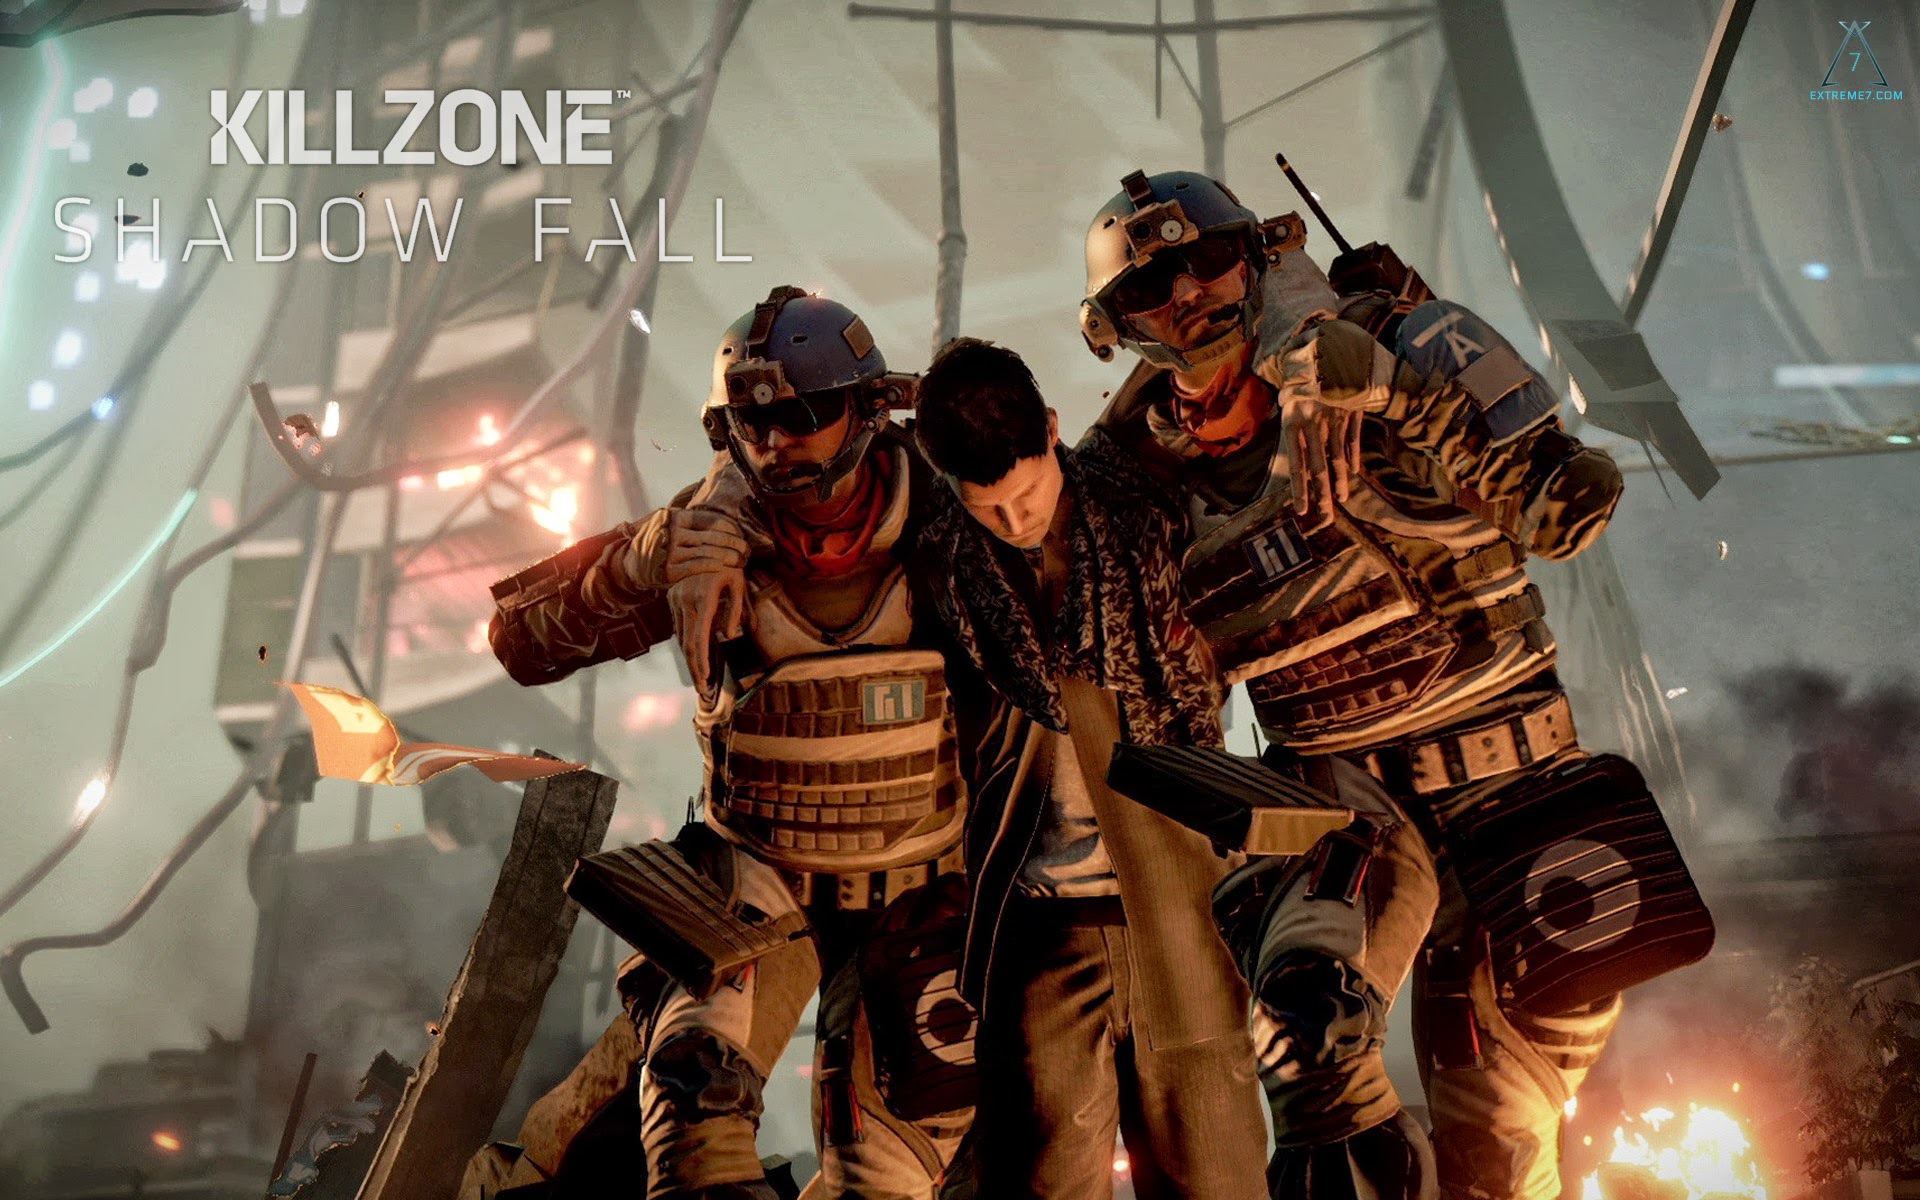 Killzone: Shadow Fall: carrying the wounded Desktop wallpapers 1152x864